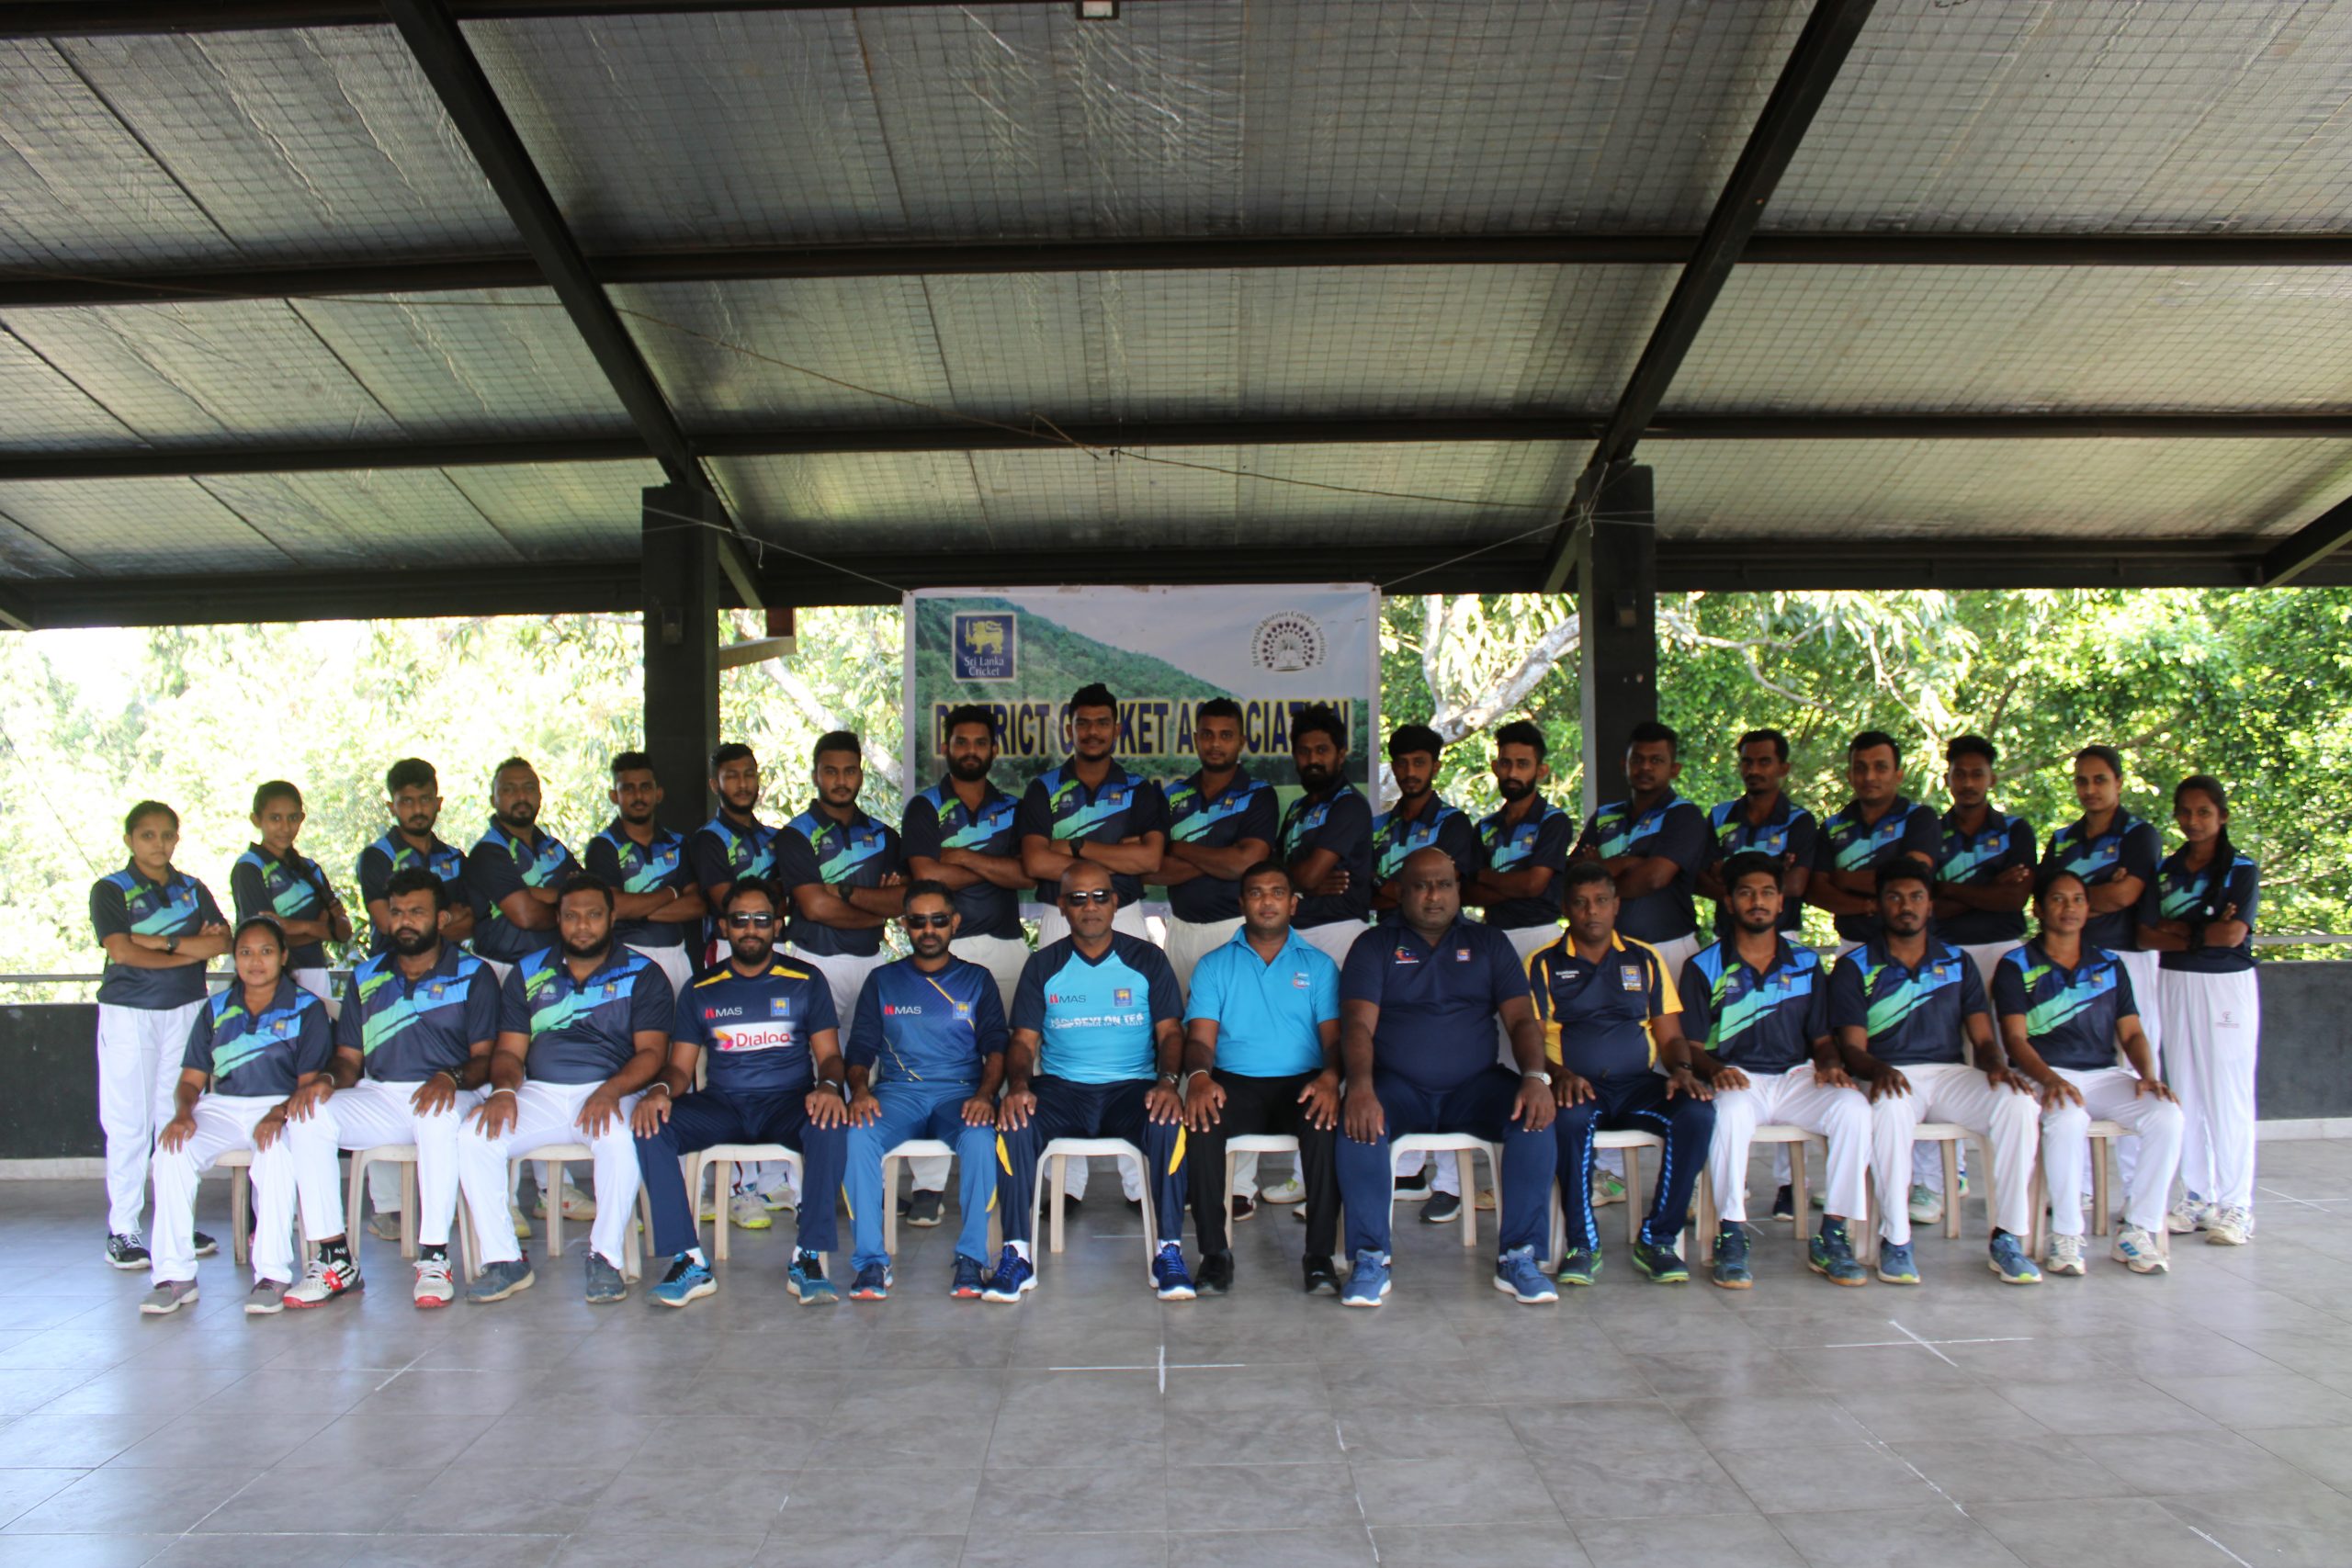 Uva Province  Conducted a Introduction to Cricket Programme (Level 0) for 2022